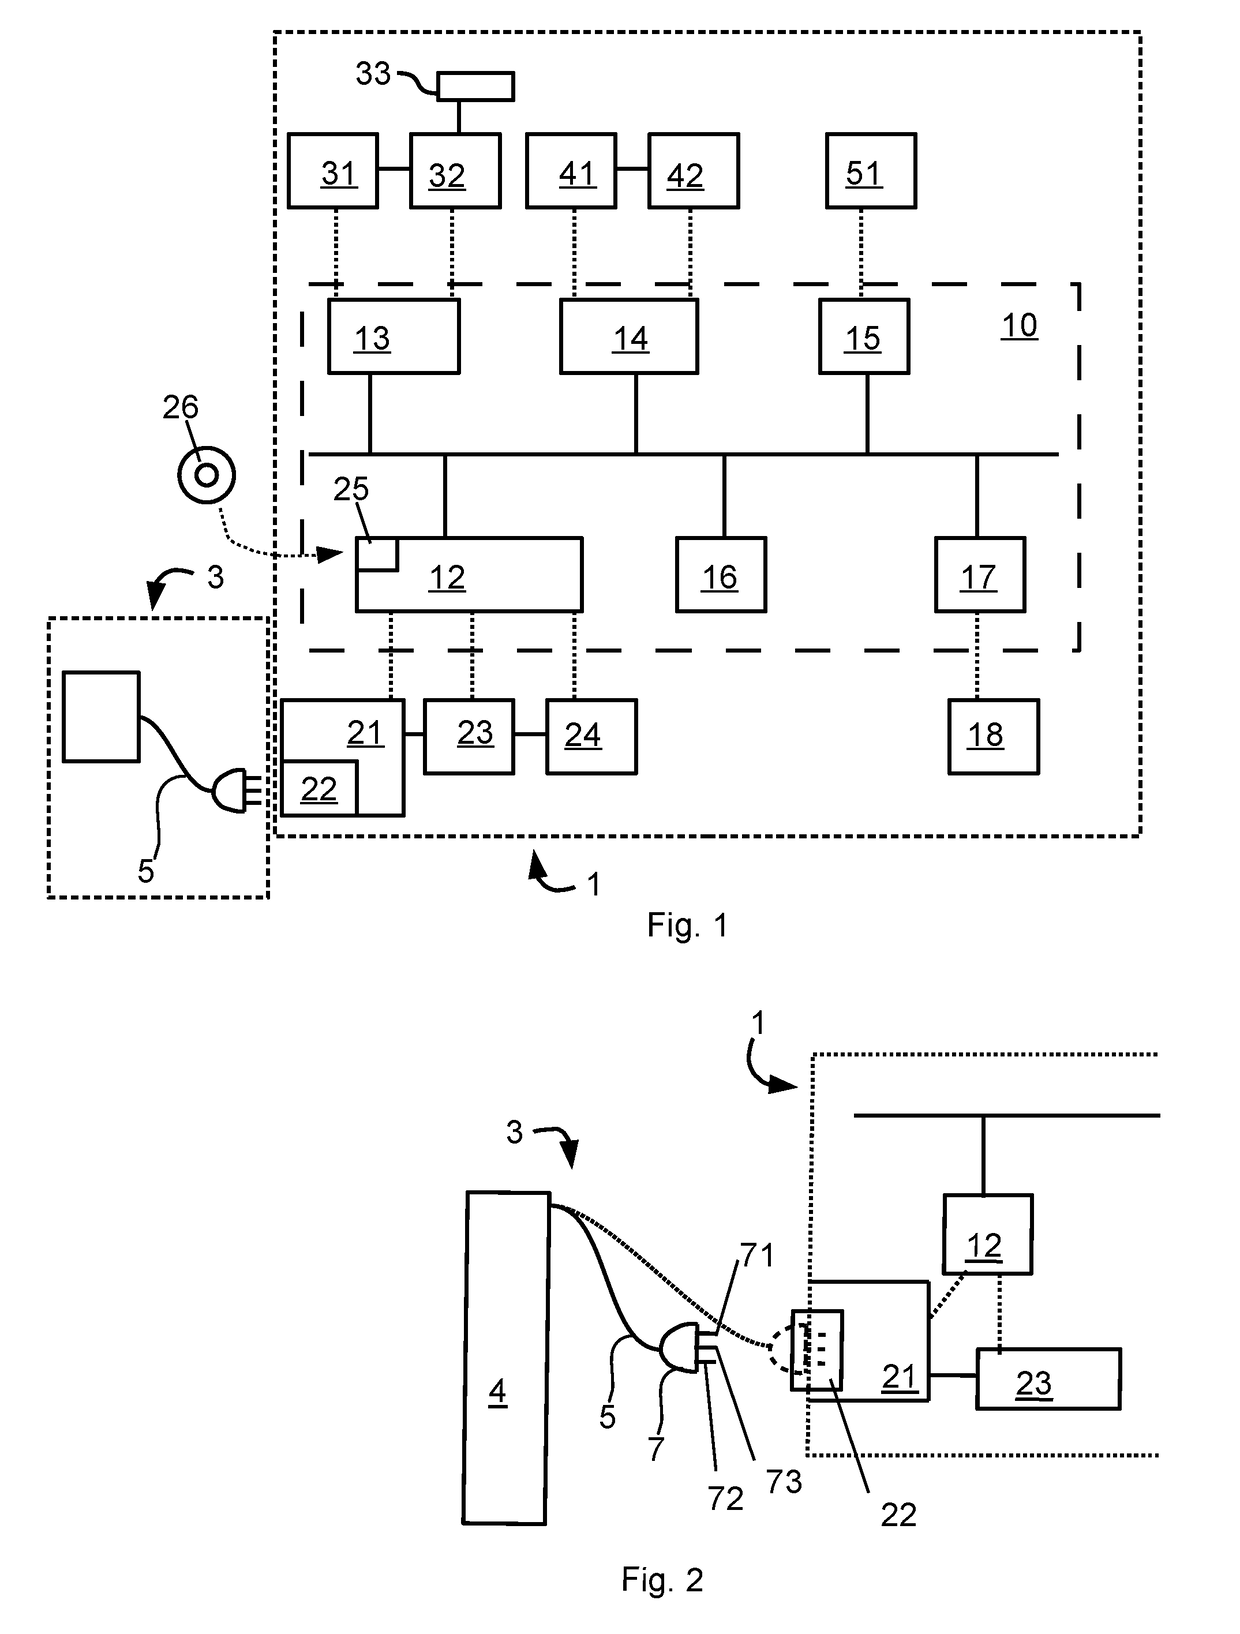 Method and control system for charging a vehicle